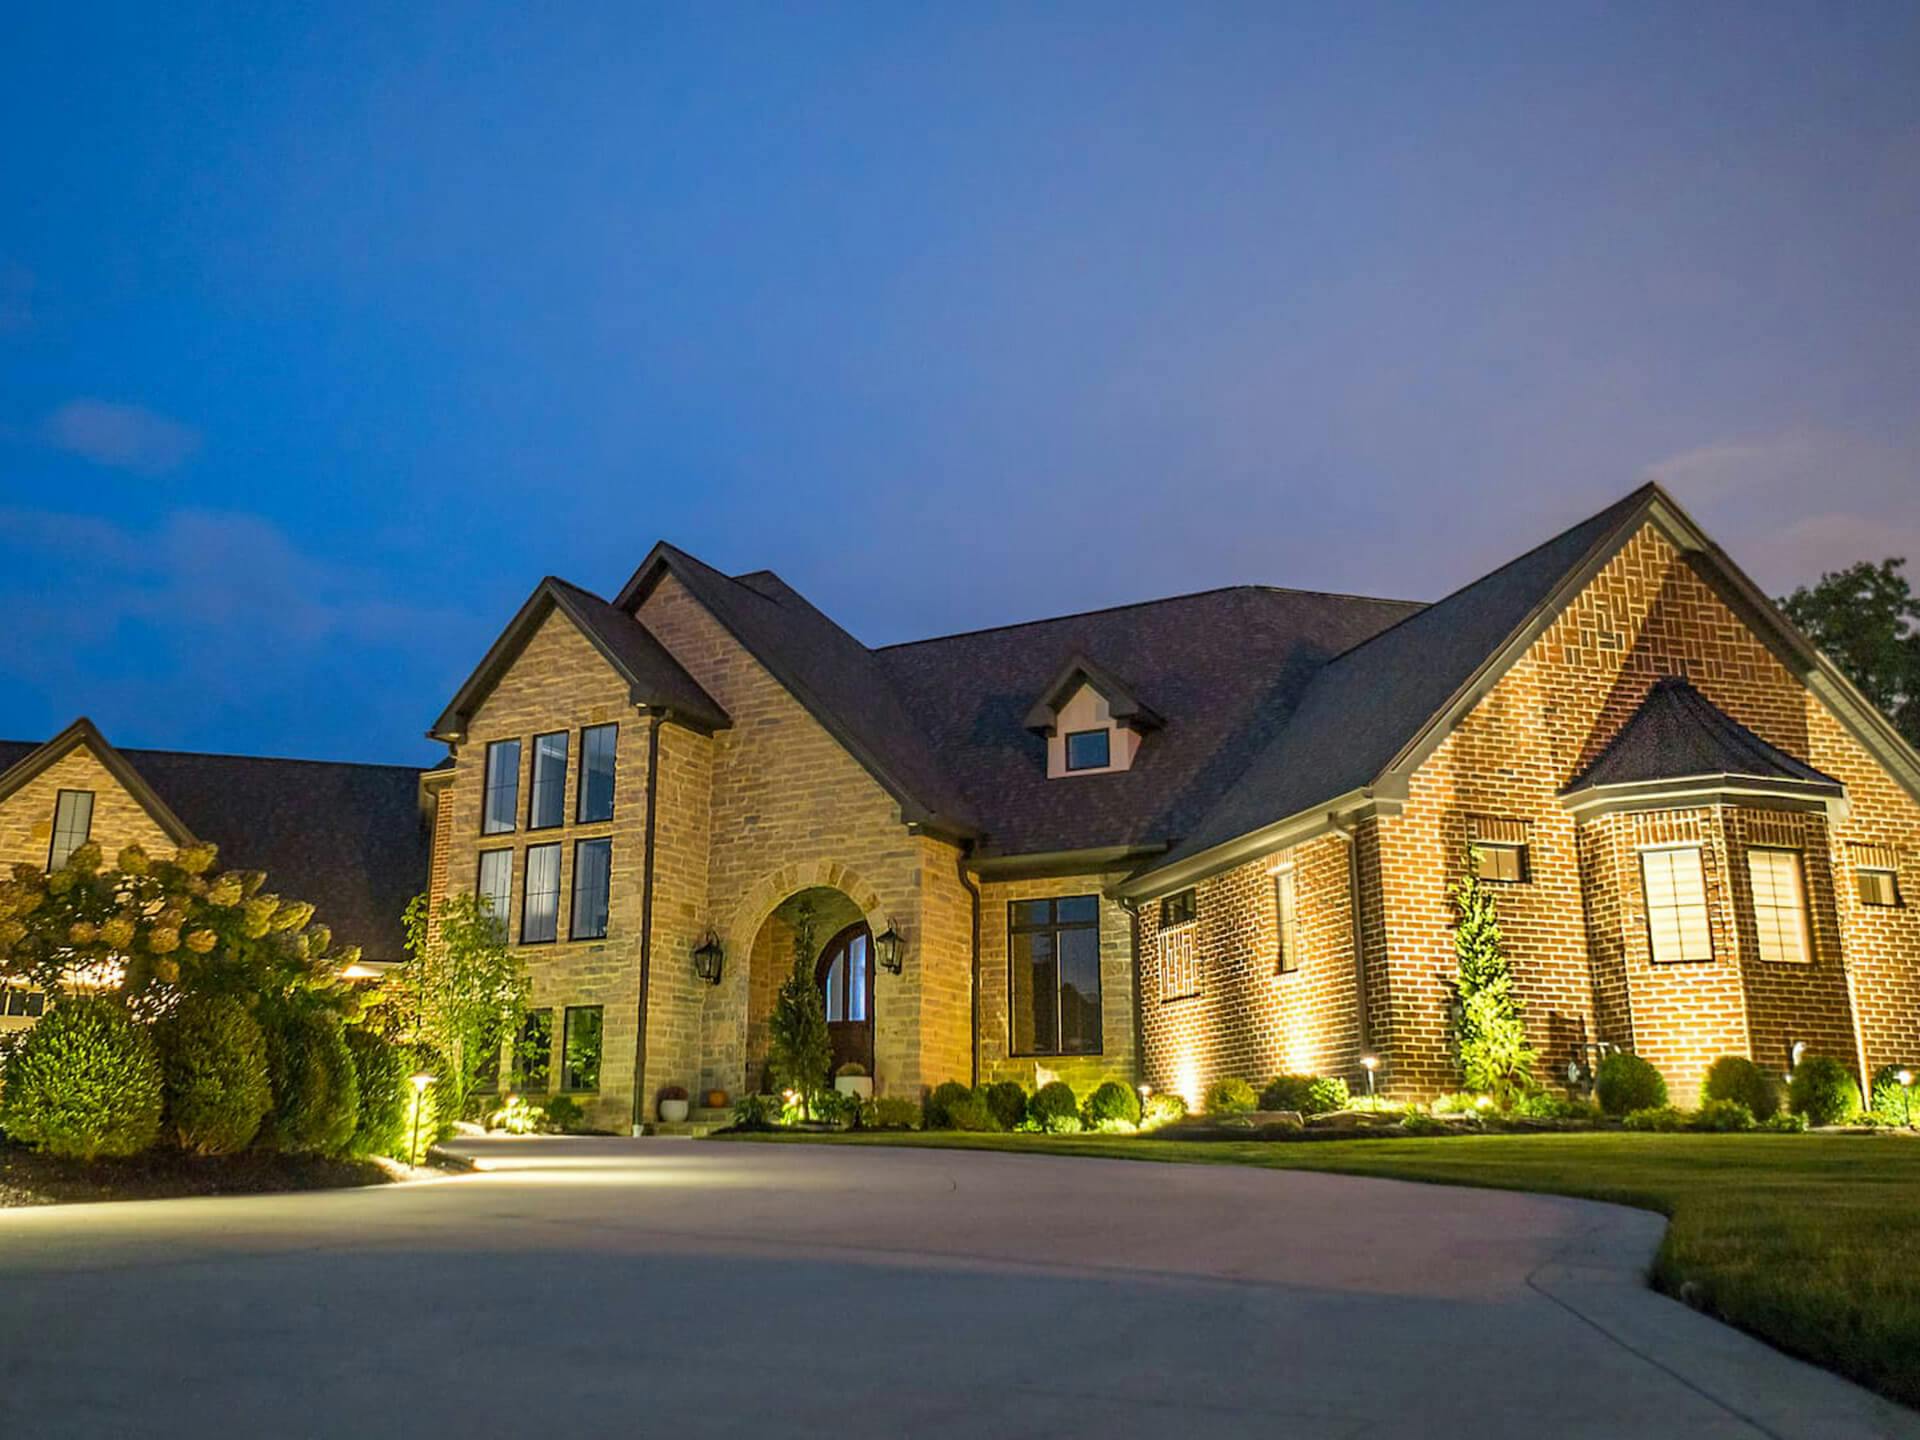 Exterior landscape of a large brick home with variety of uplighting